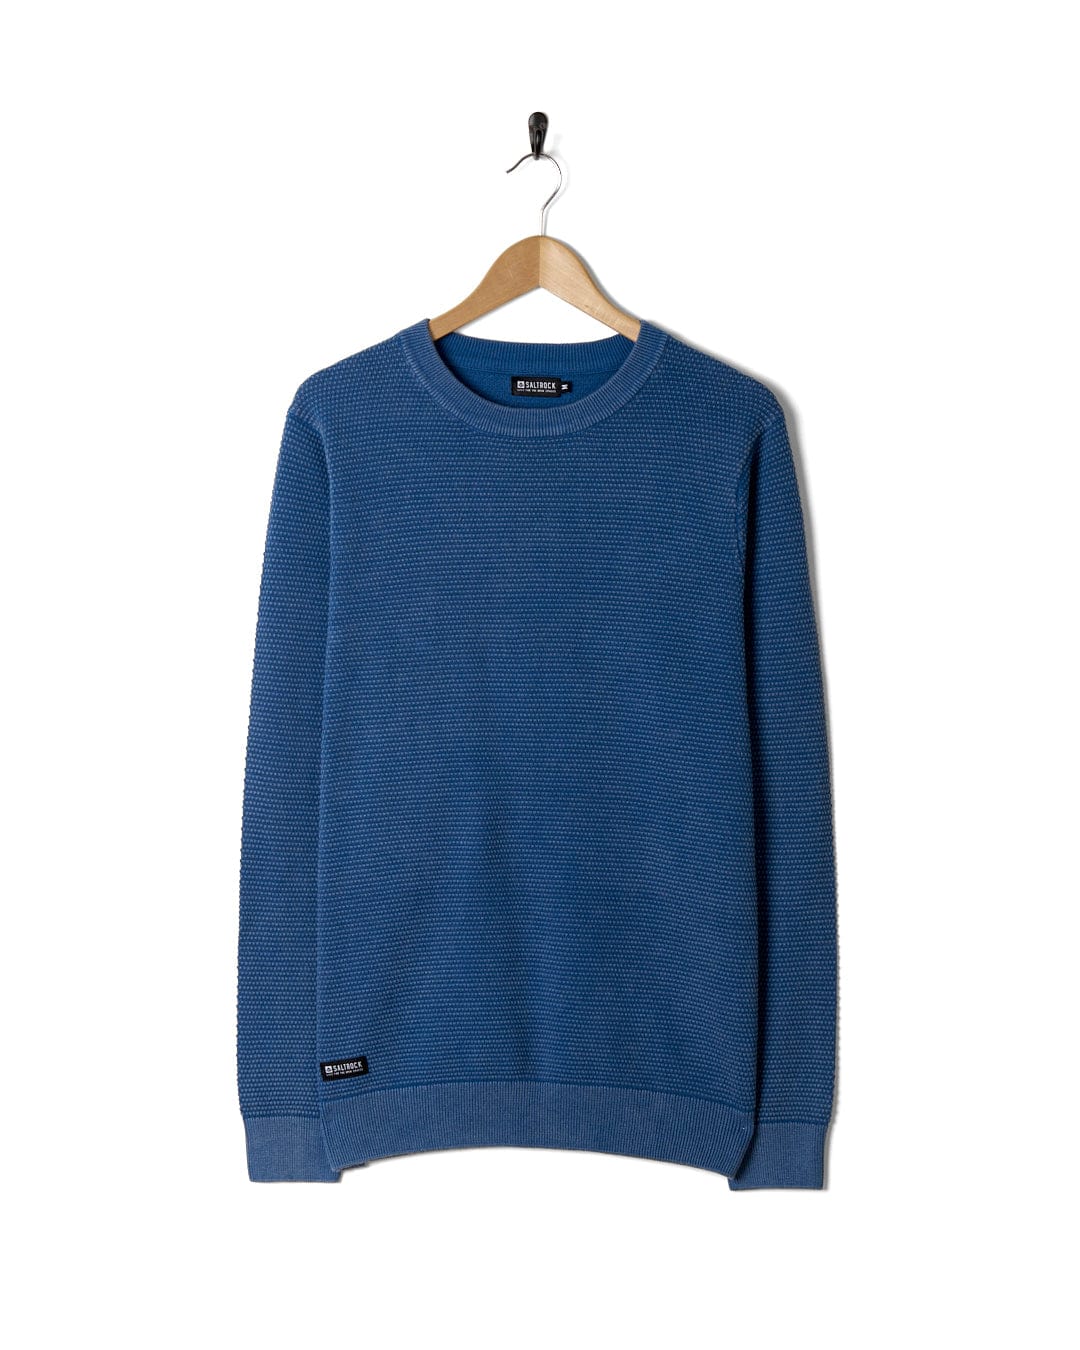 A Saltrock Moss - Mens Washed Knitted Crew sweatshirt hanging on a hanger.